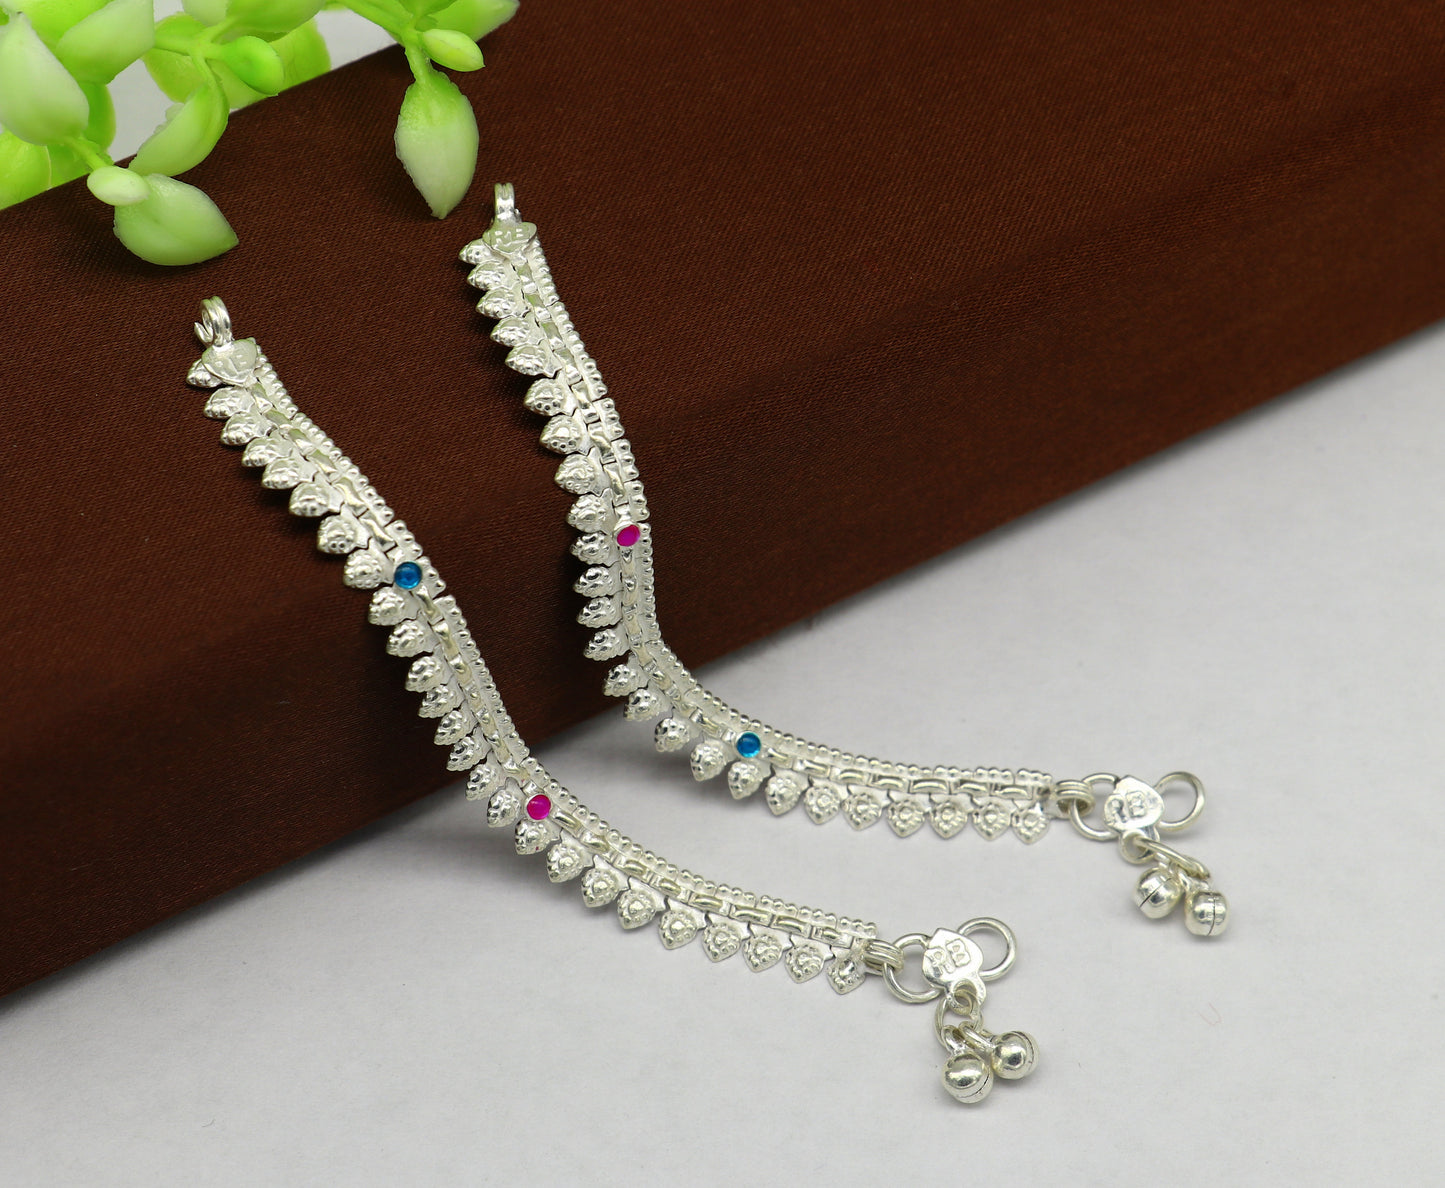 4.2" handmade solid sterling silver new born baby ankle bracelet anklets, excellent gifting baby foot bracelet charm kids jewelry ank359 - TRIBAL ORNAMENTS